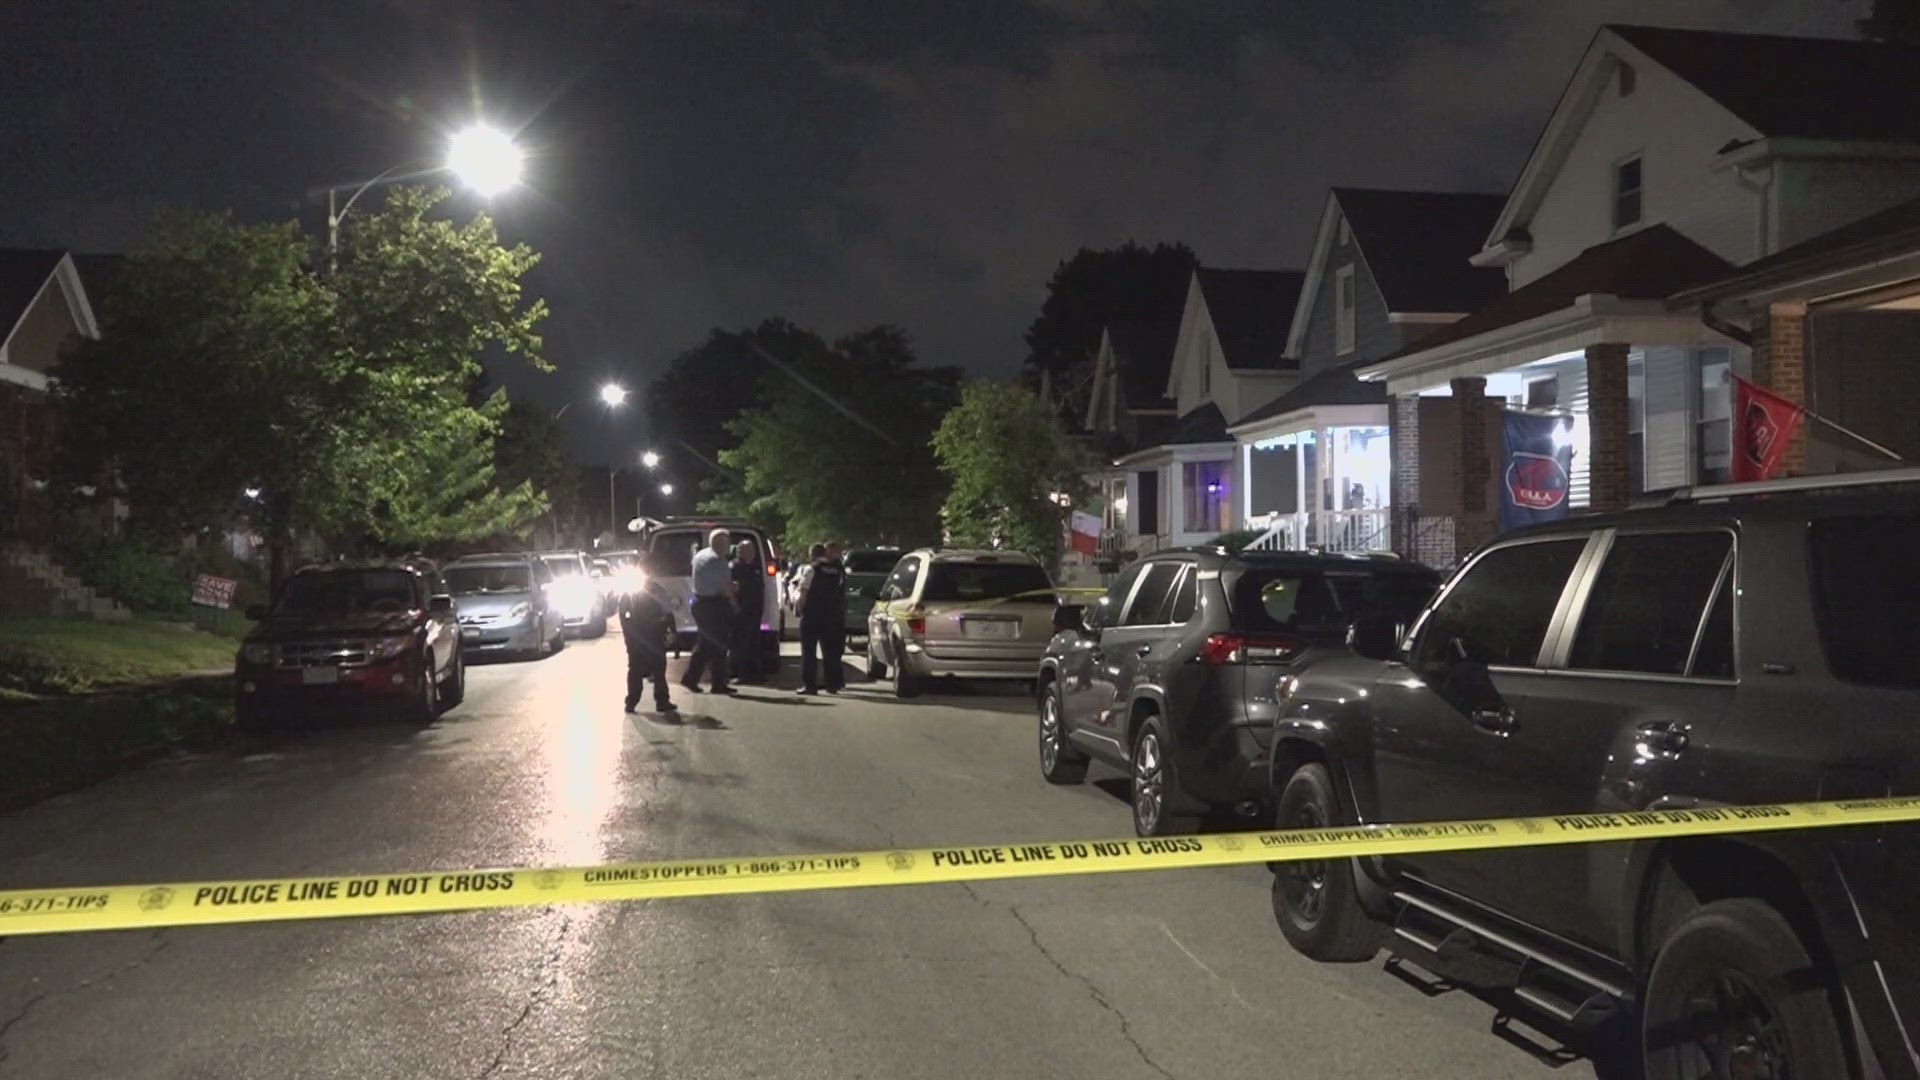 A man died after being shot multiple times in the chest early Thursday on Goethe Avenue. A suspect turned himself into police.